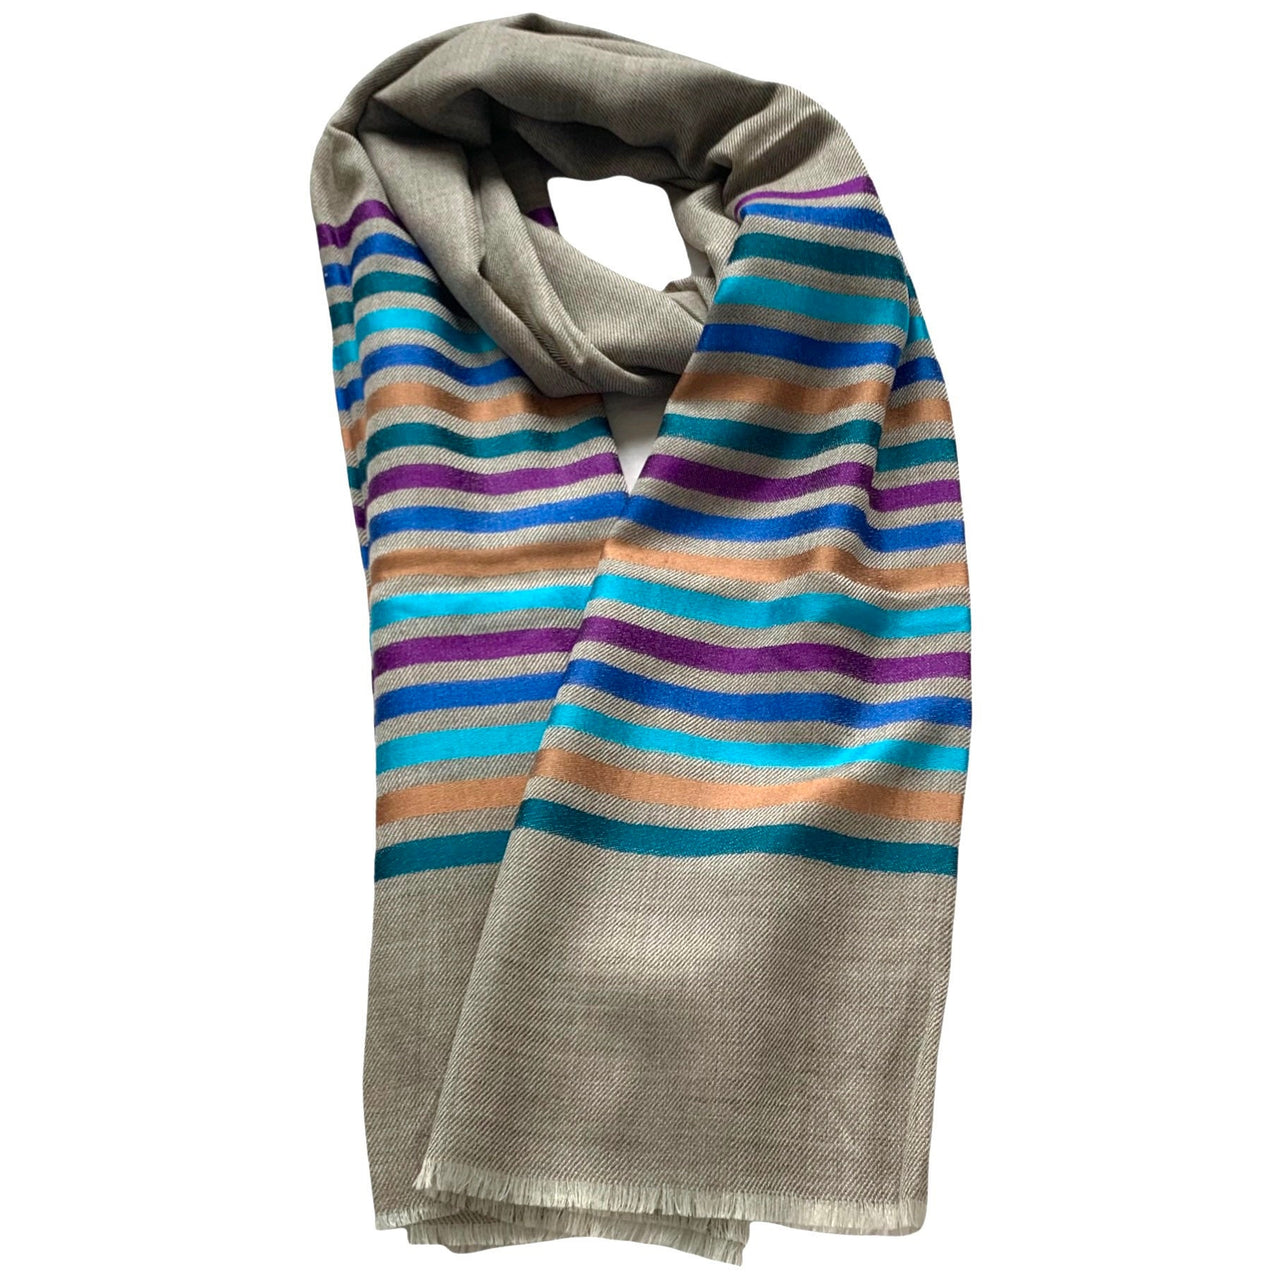 Stunning Silk Cashmere Striped Reversible Unisex Scarf Shawl Wrap Stole 28x80”inches